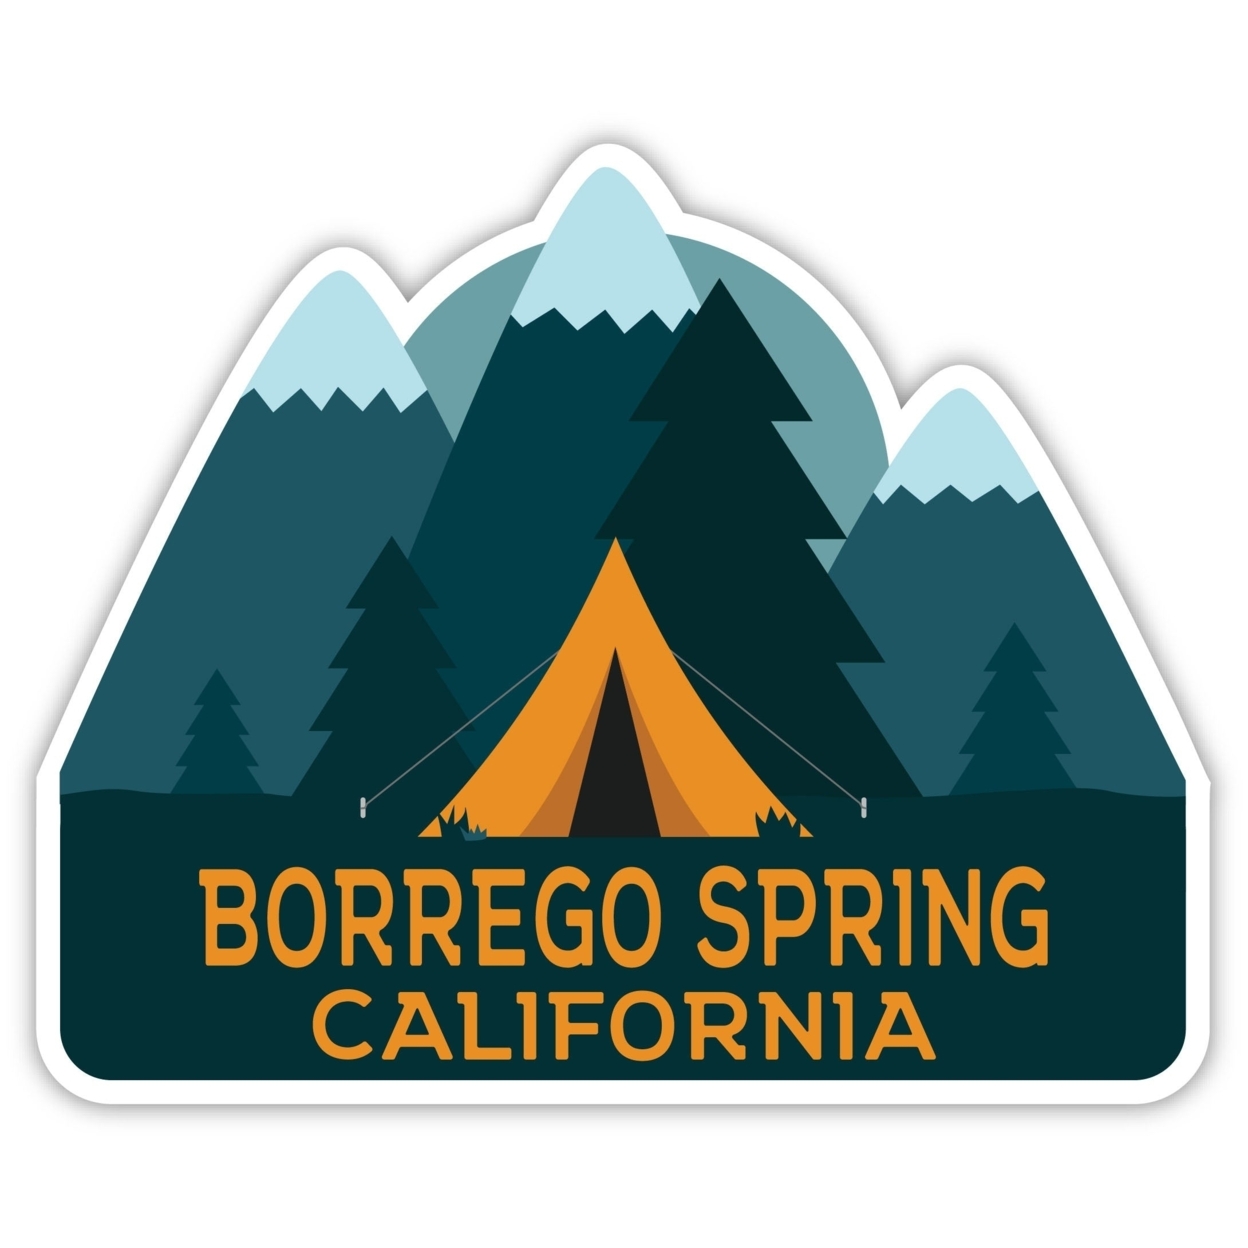 Borrego Spring California Souvenir Decorative Stickers (Choose Theme And Size) - 4-Pack, 10-Inch, Tent